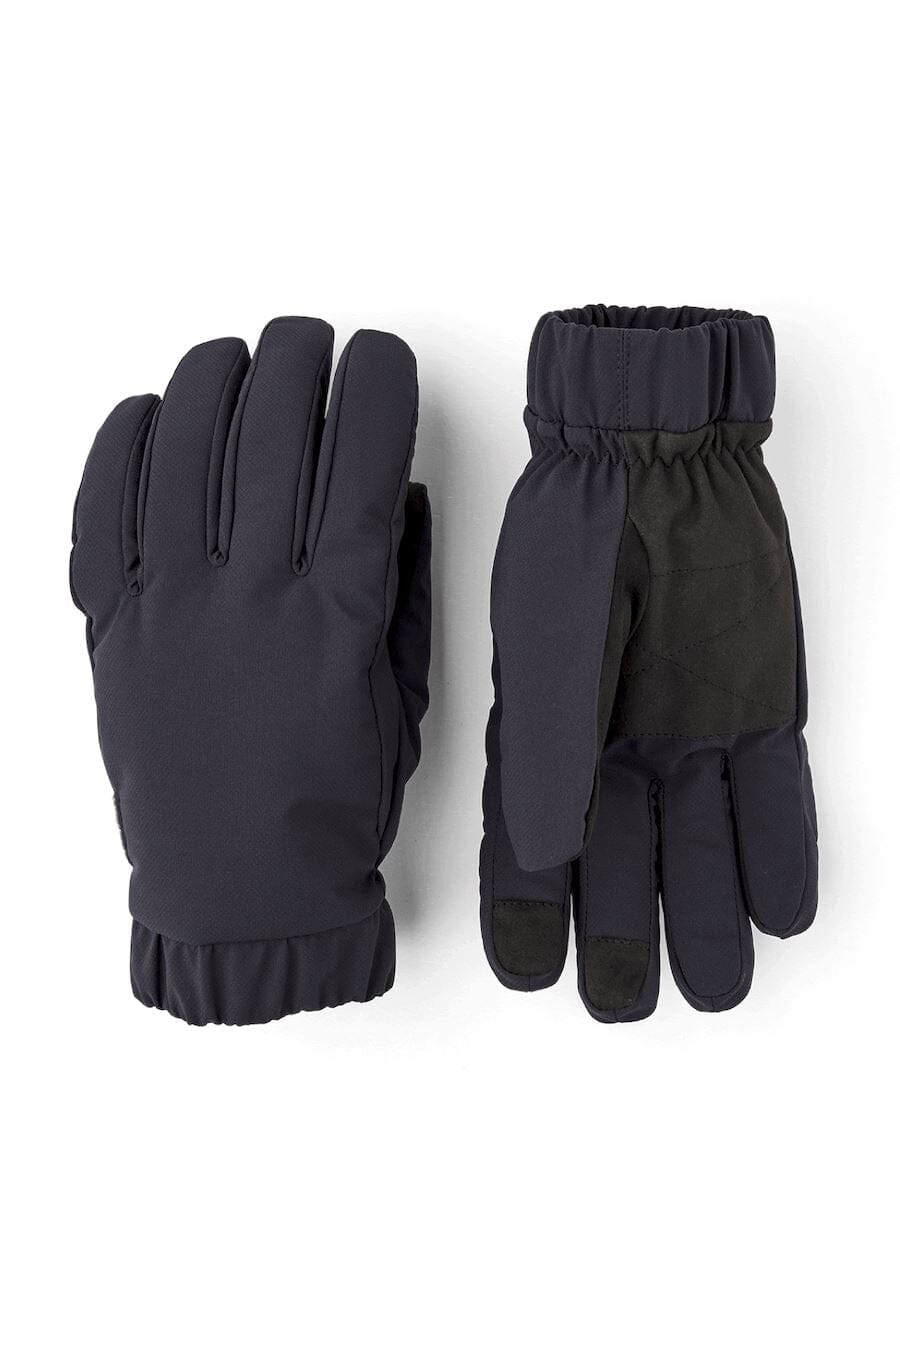 Gant tactile Axis Homme - Accessoires - Gants - Mitaines Hestra